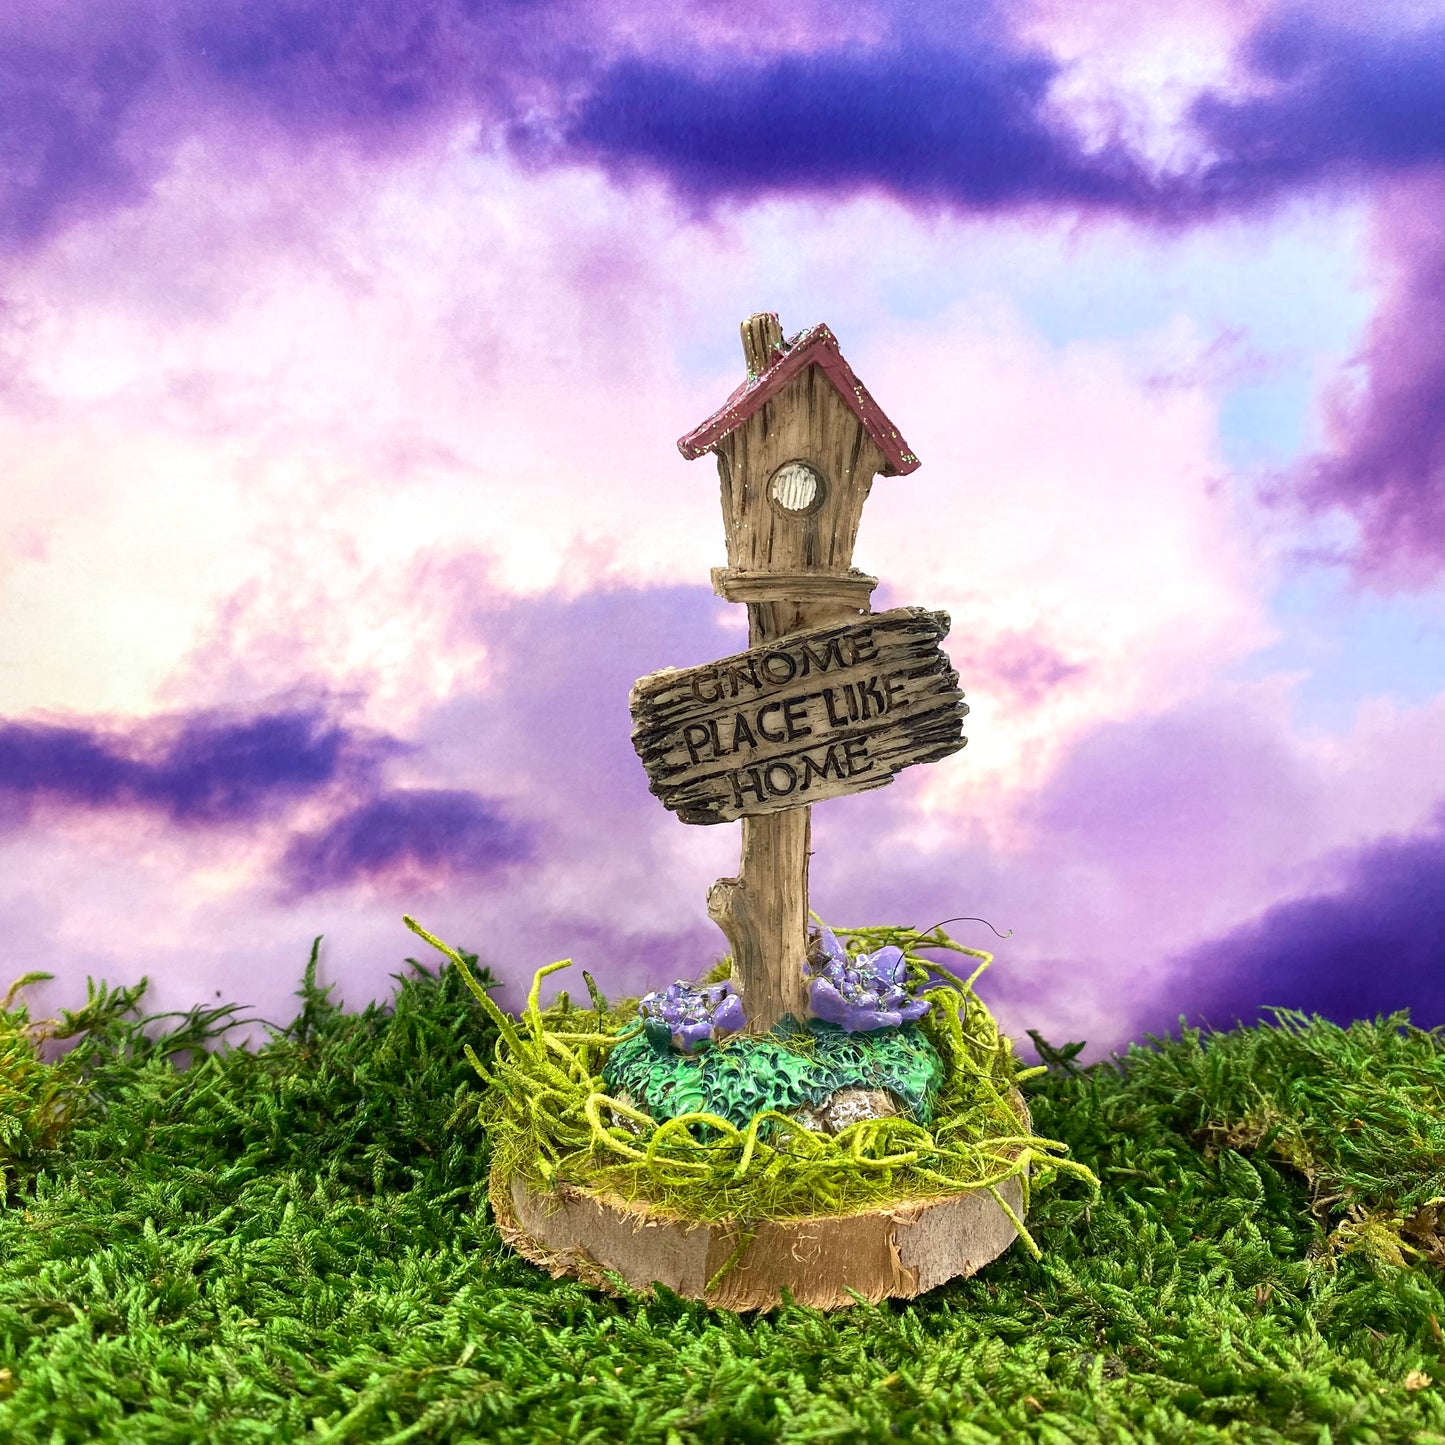 Gnome Place Like Home Fairy Garden Sign